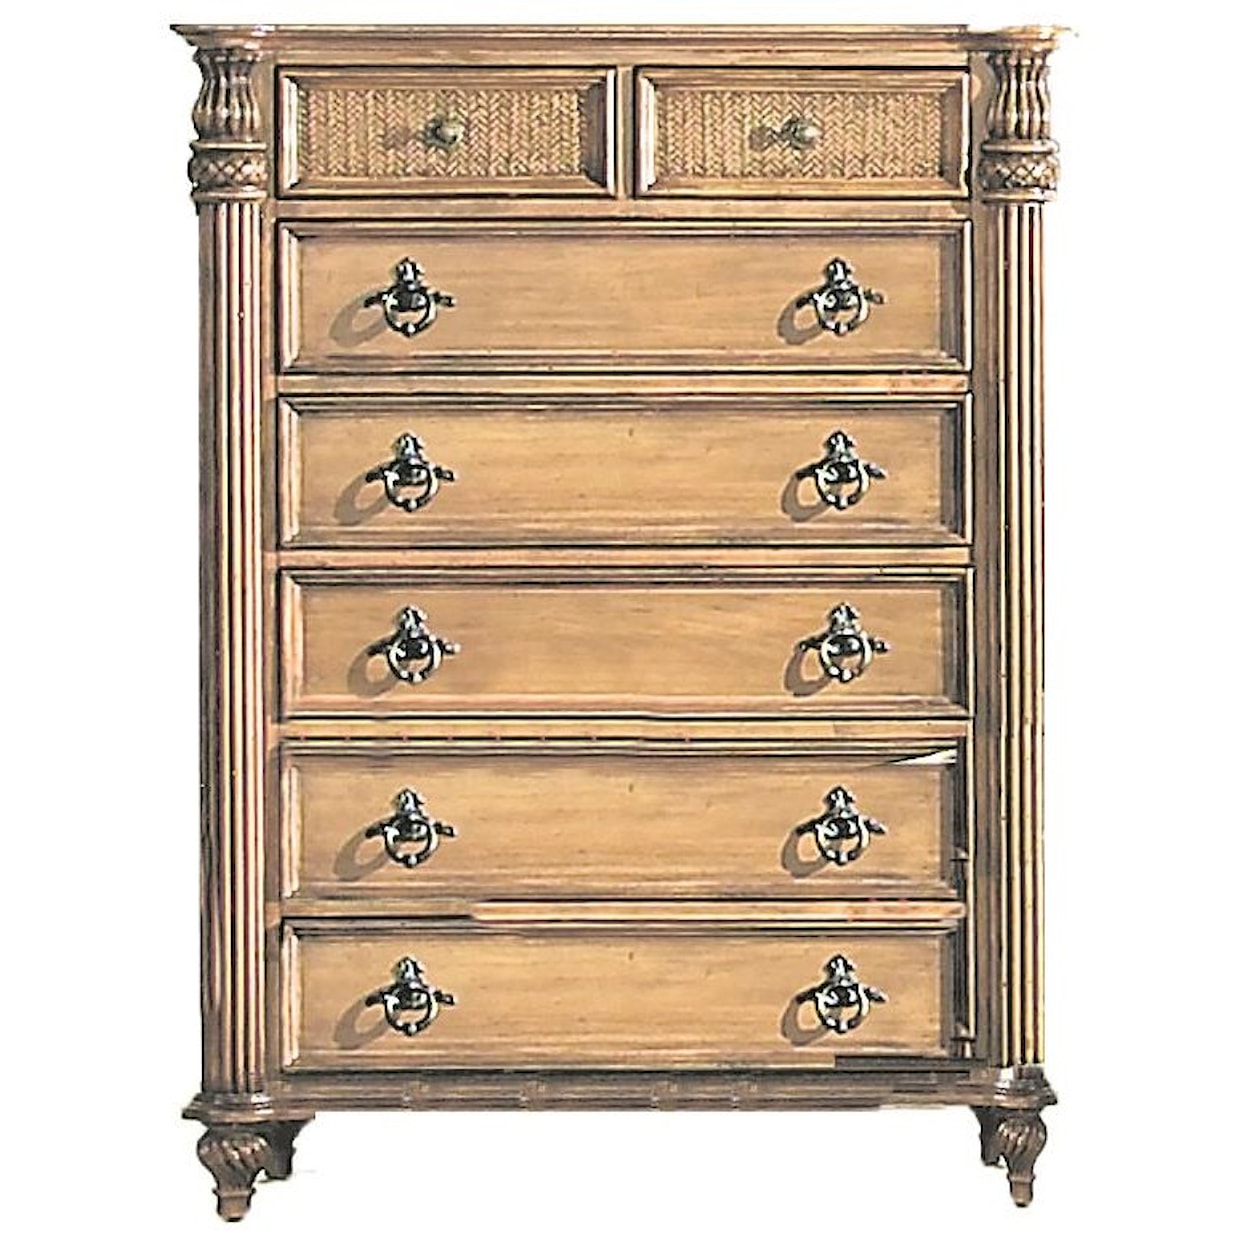 Endura Furniture Key West Chest of Drawers